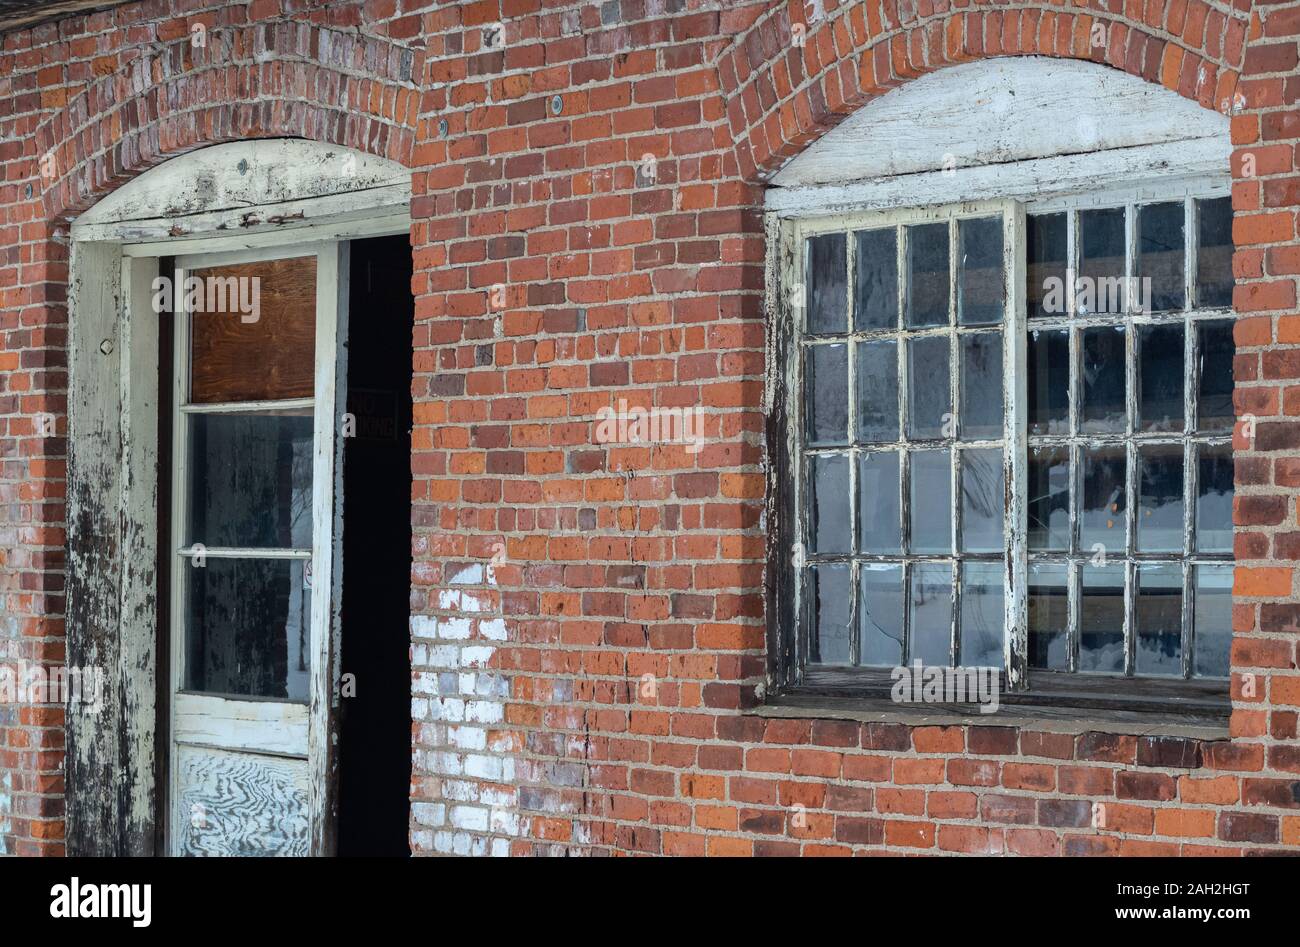 Textures and features of an old exterior brick wall with windows and wooden door. Stock Photo